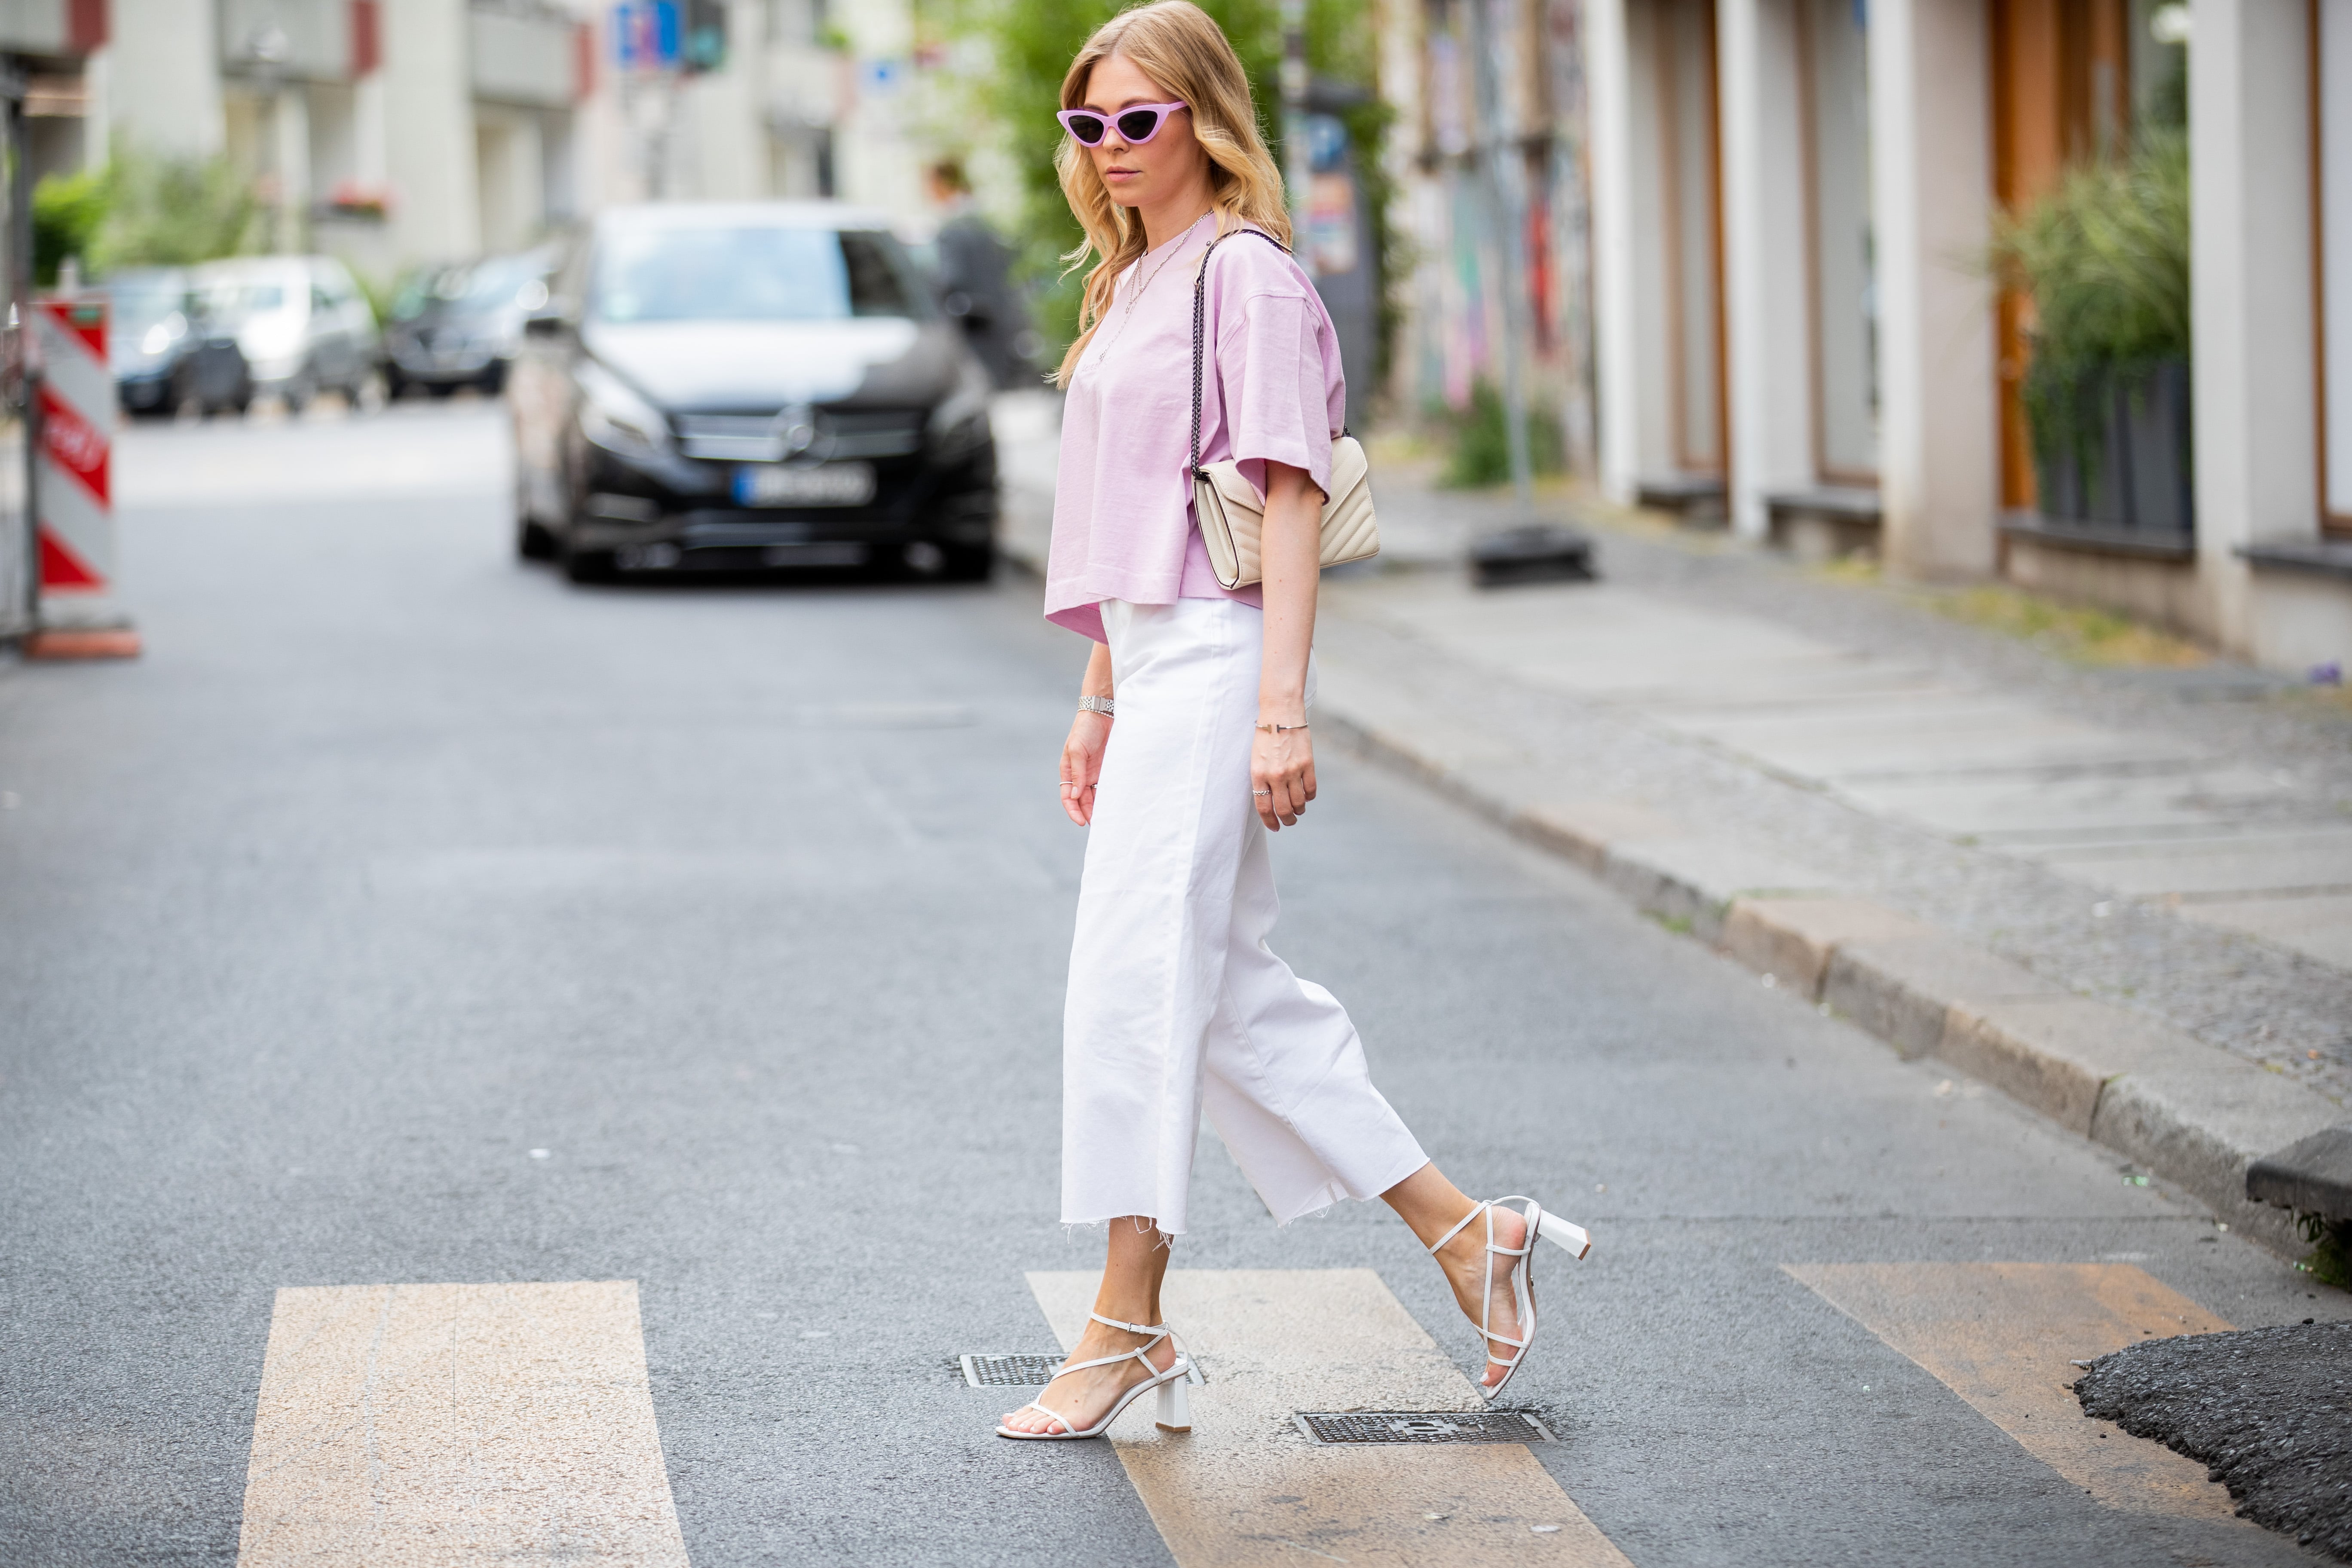 Spring Style: Espadrille Wedges + Tie-Front Shirt